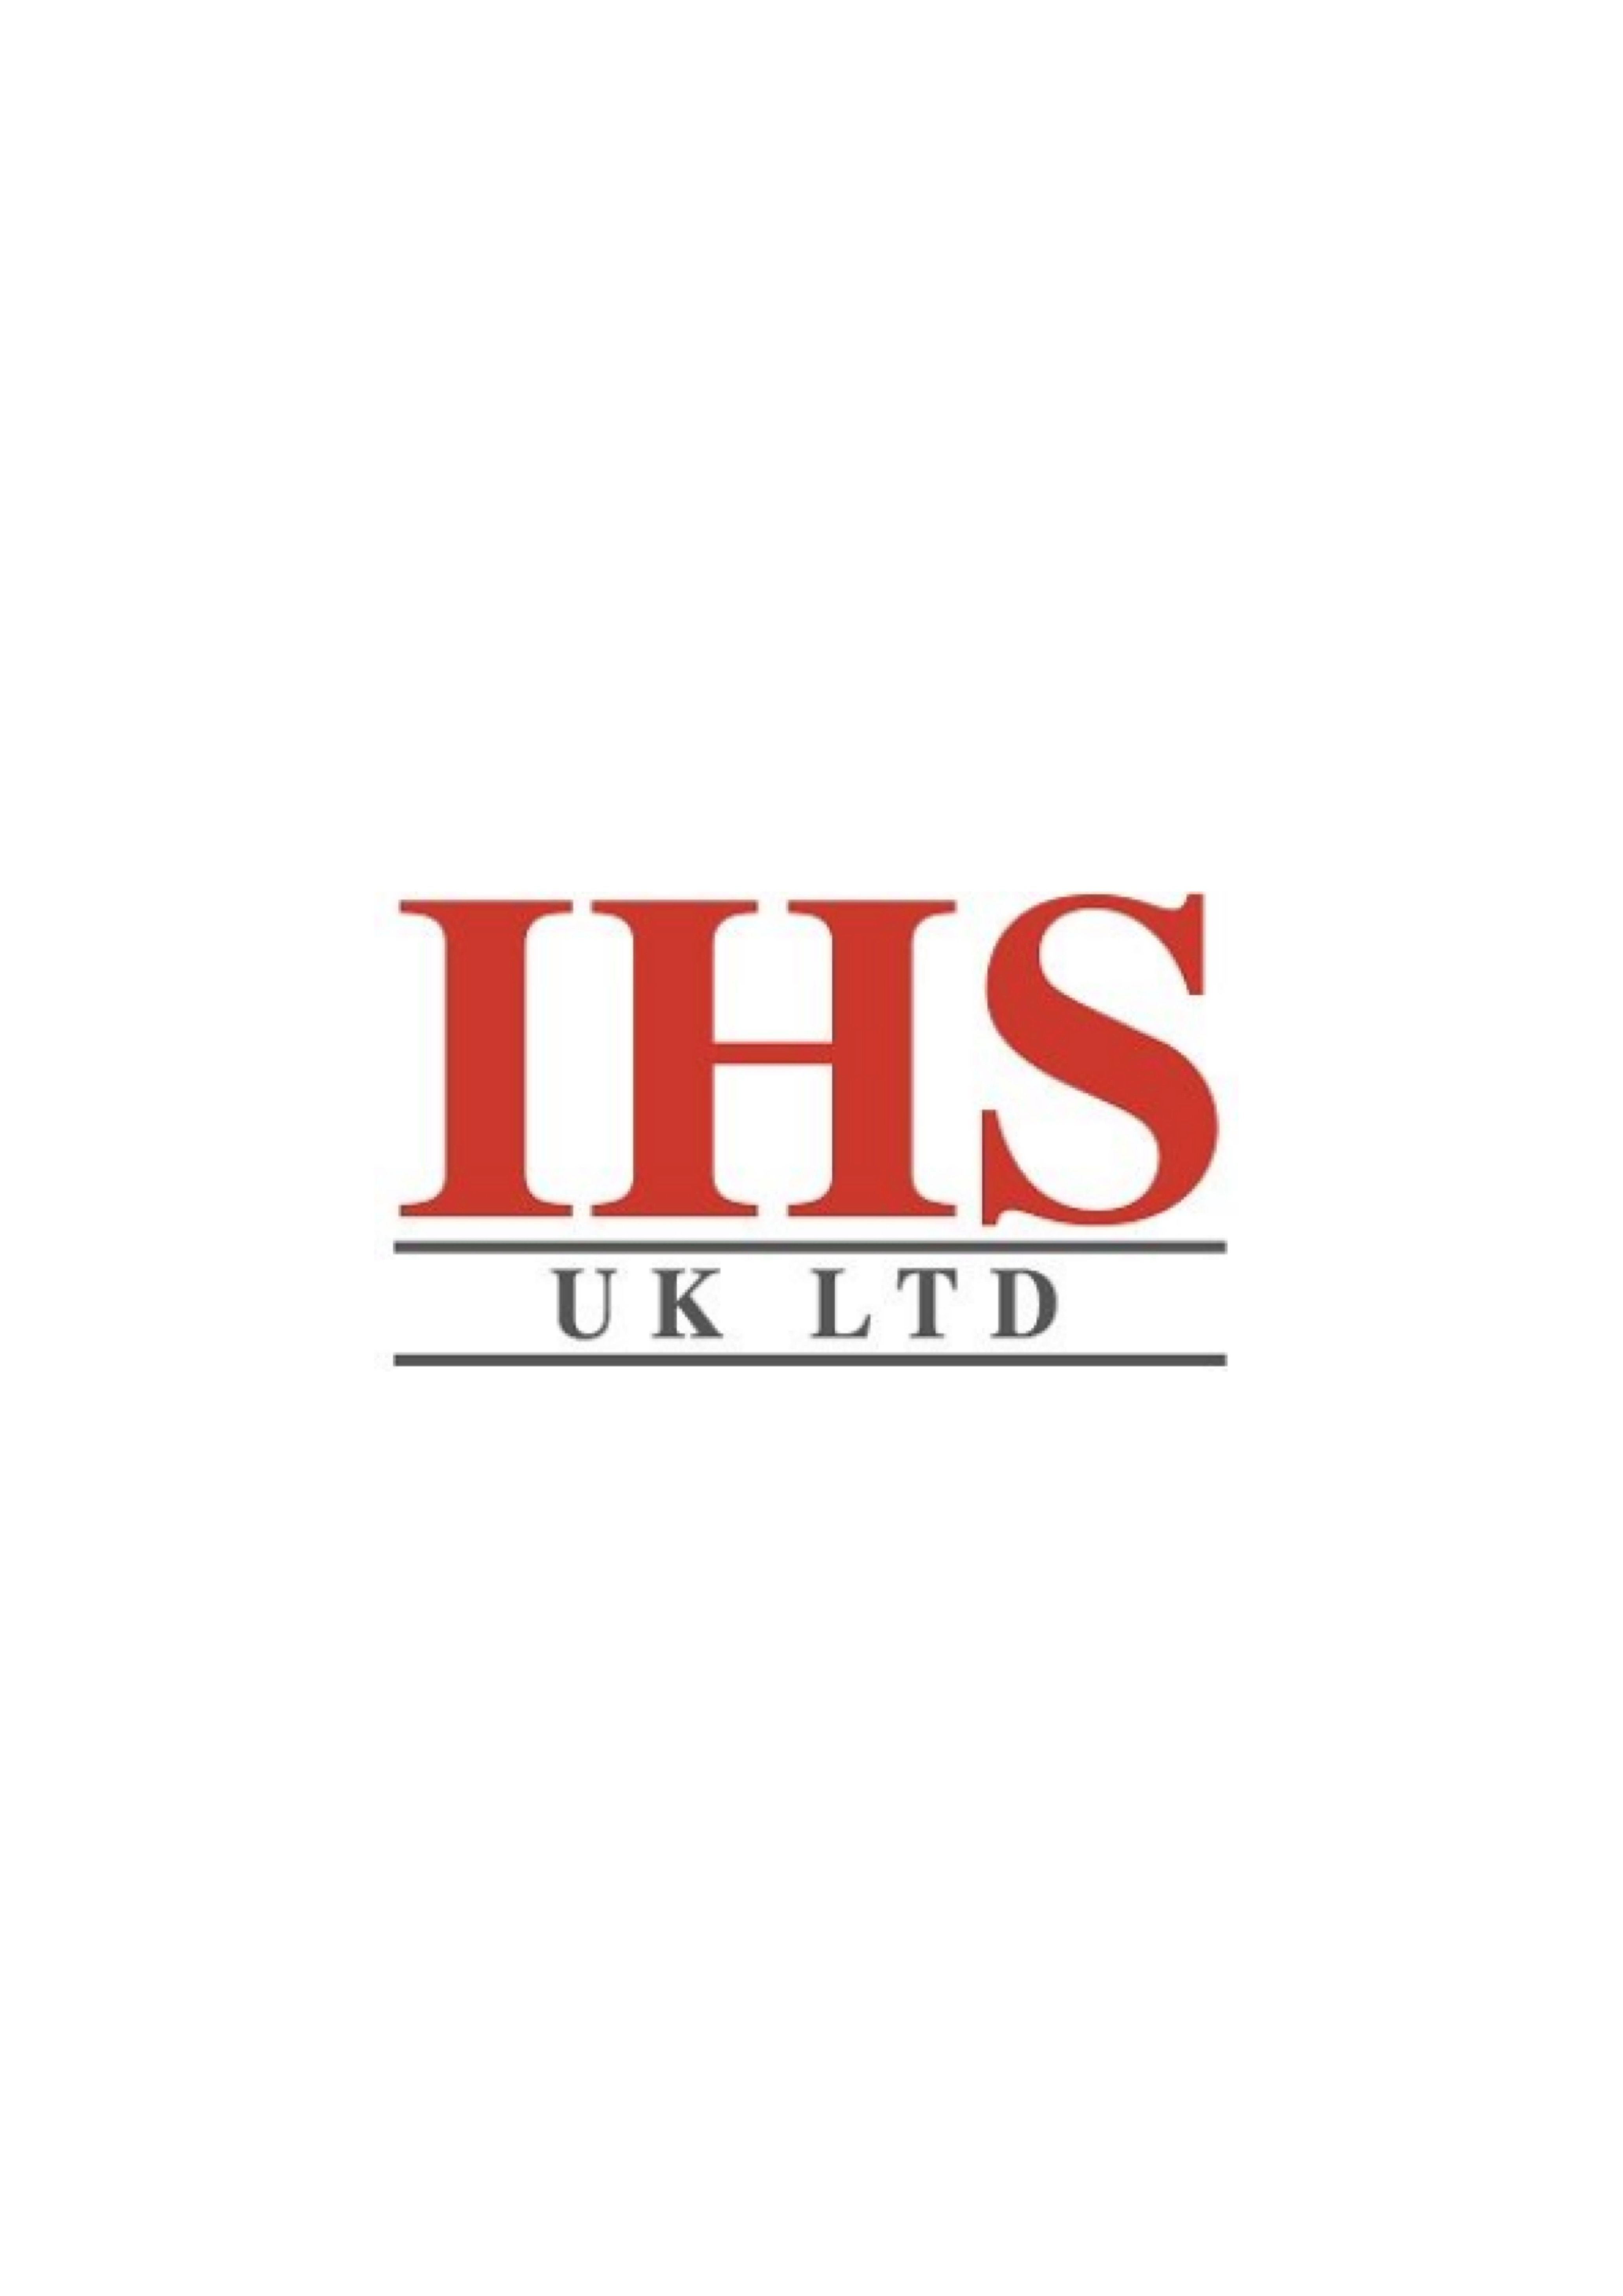 Integrated Hydraulic Solutions UK